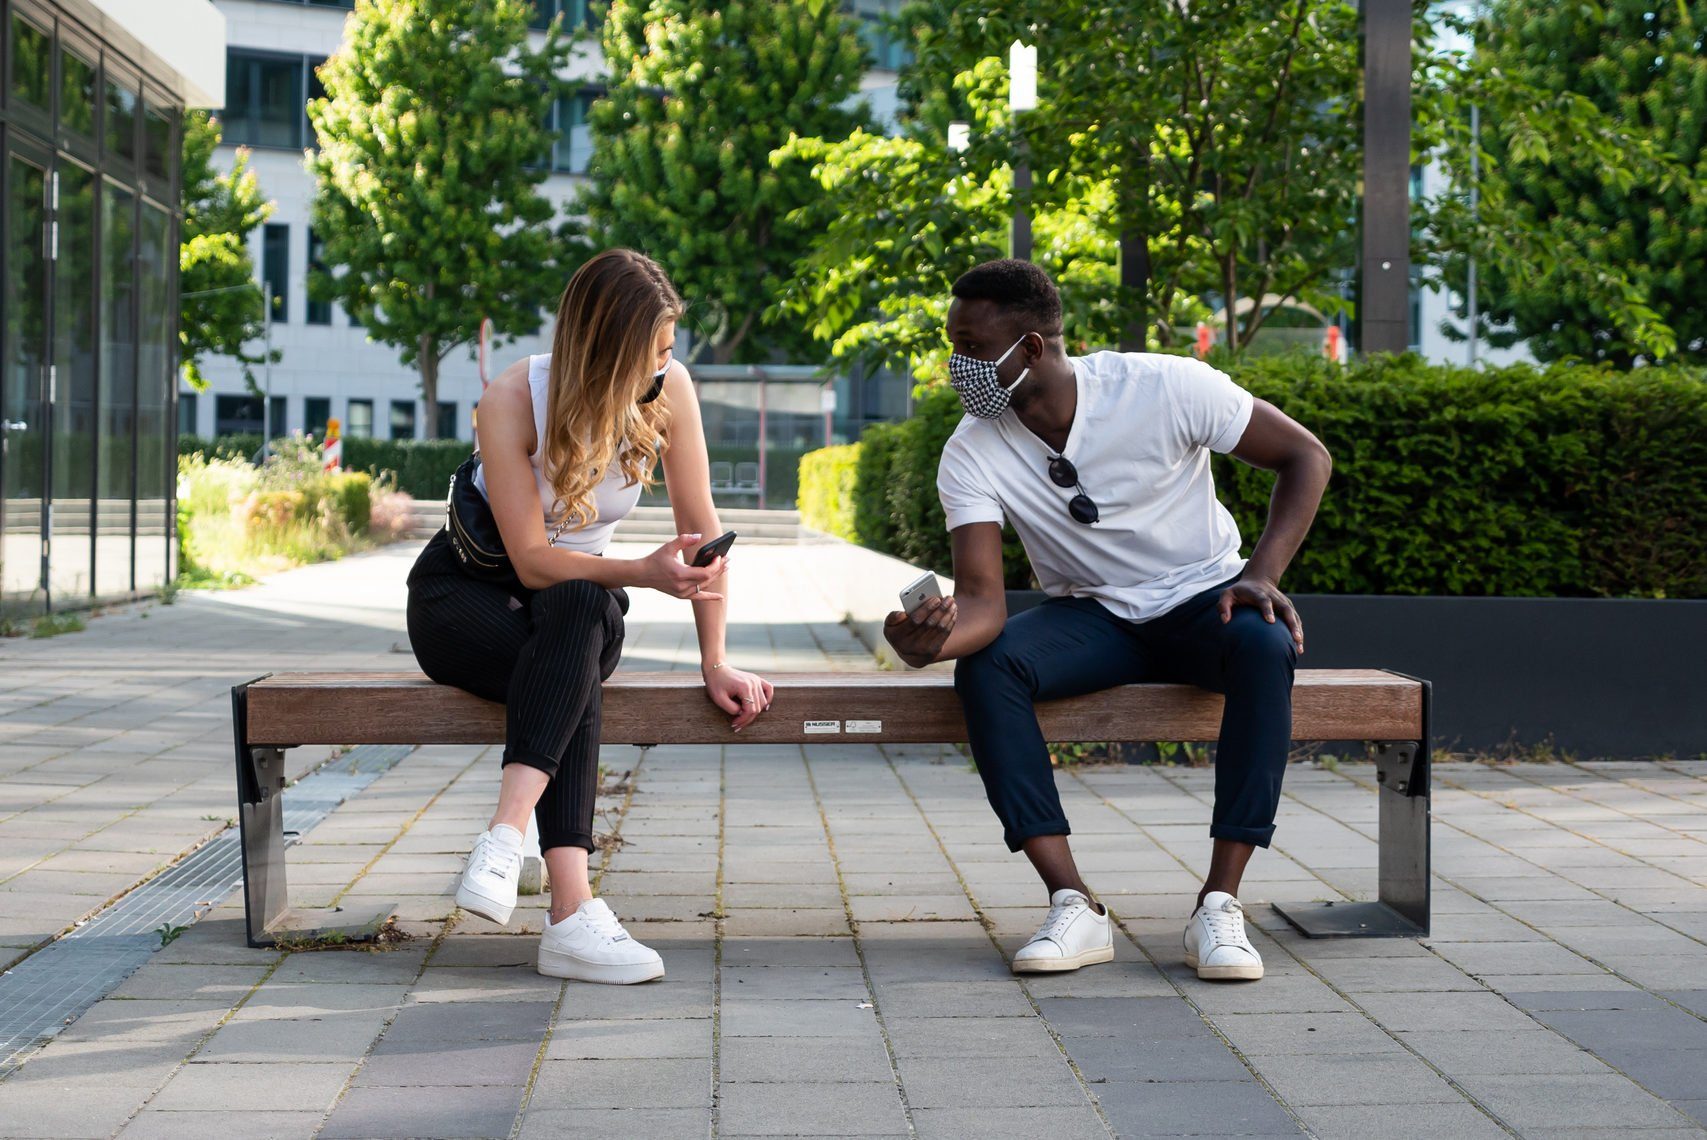 Young Man and Woman Social Distancing on Bench Using Phones